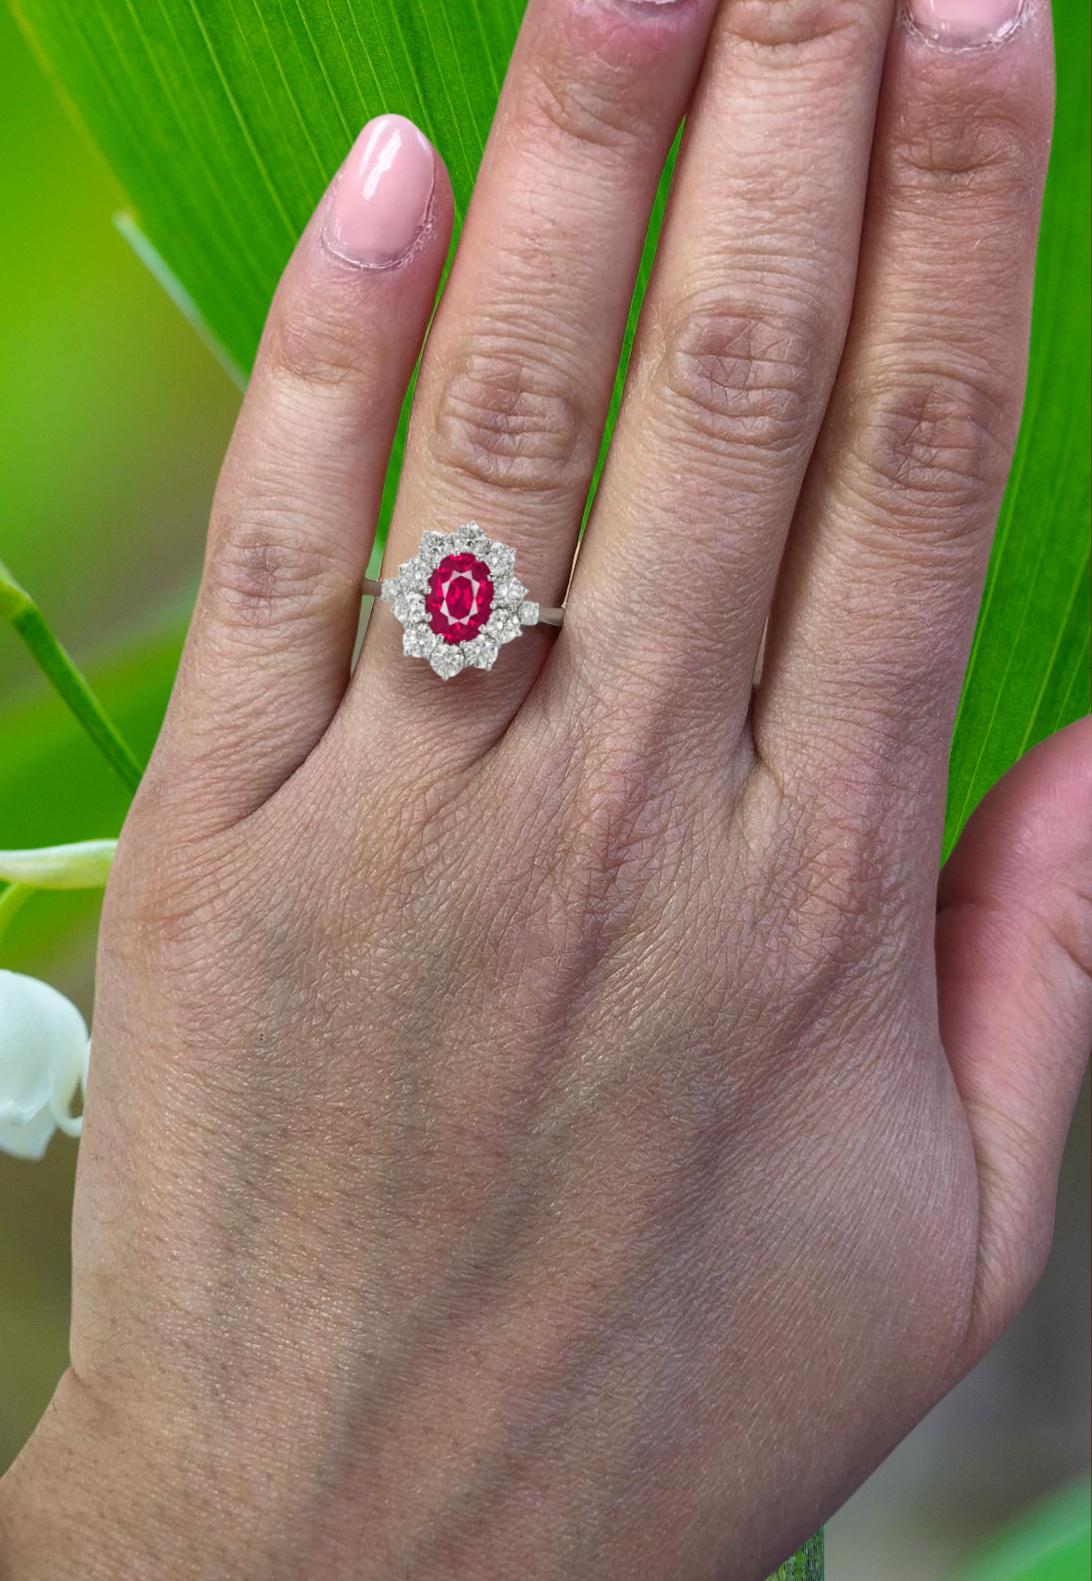 This spectacular oval ruby engagement ring features a magnificent, 2 carat pure red ruby. This world class gem is a beautifully symmetrical oval with ideal color and exceptional brilliance and life. 

It is accompanied by Gemological Institute of